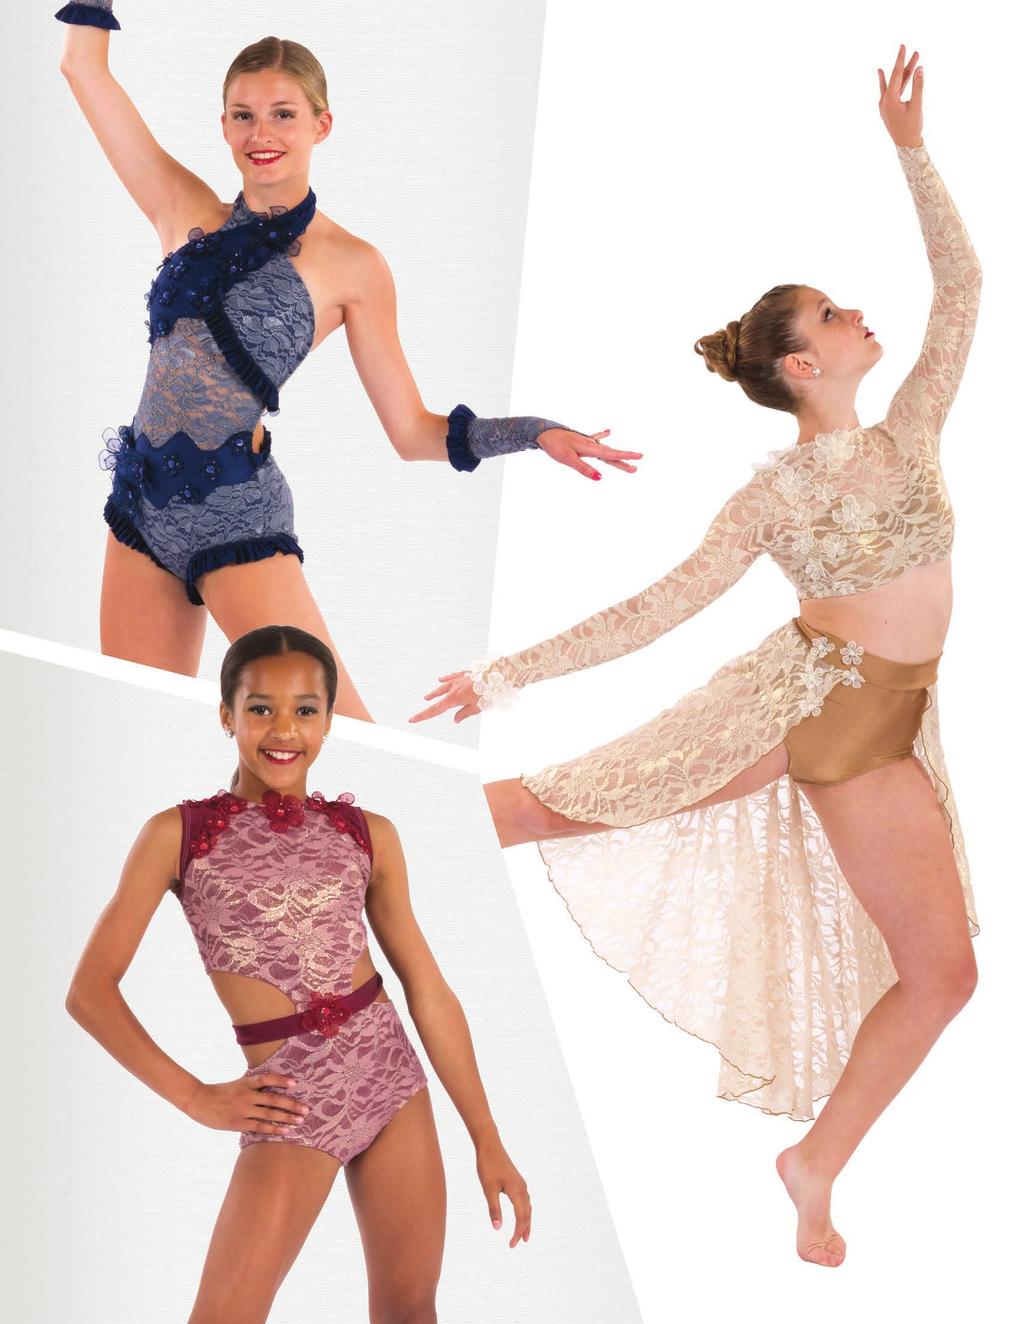 81458 LEOTARD, HAIR, MITTS (OPT) Shown: Navy Lace Colors: Navy, Burg, Ivory 81457 TOP, SKIRT Shown: